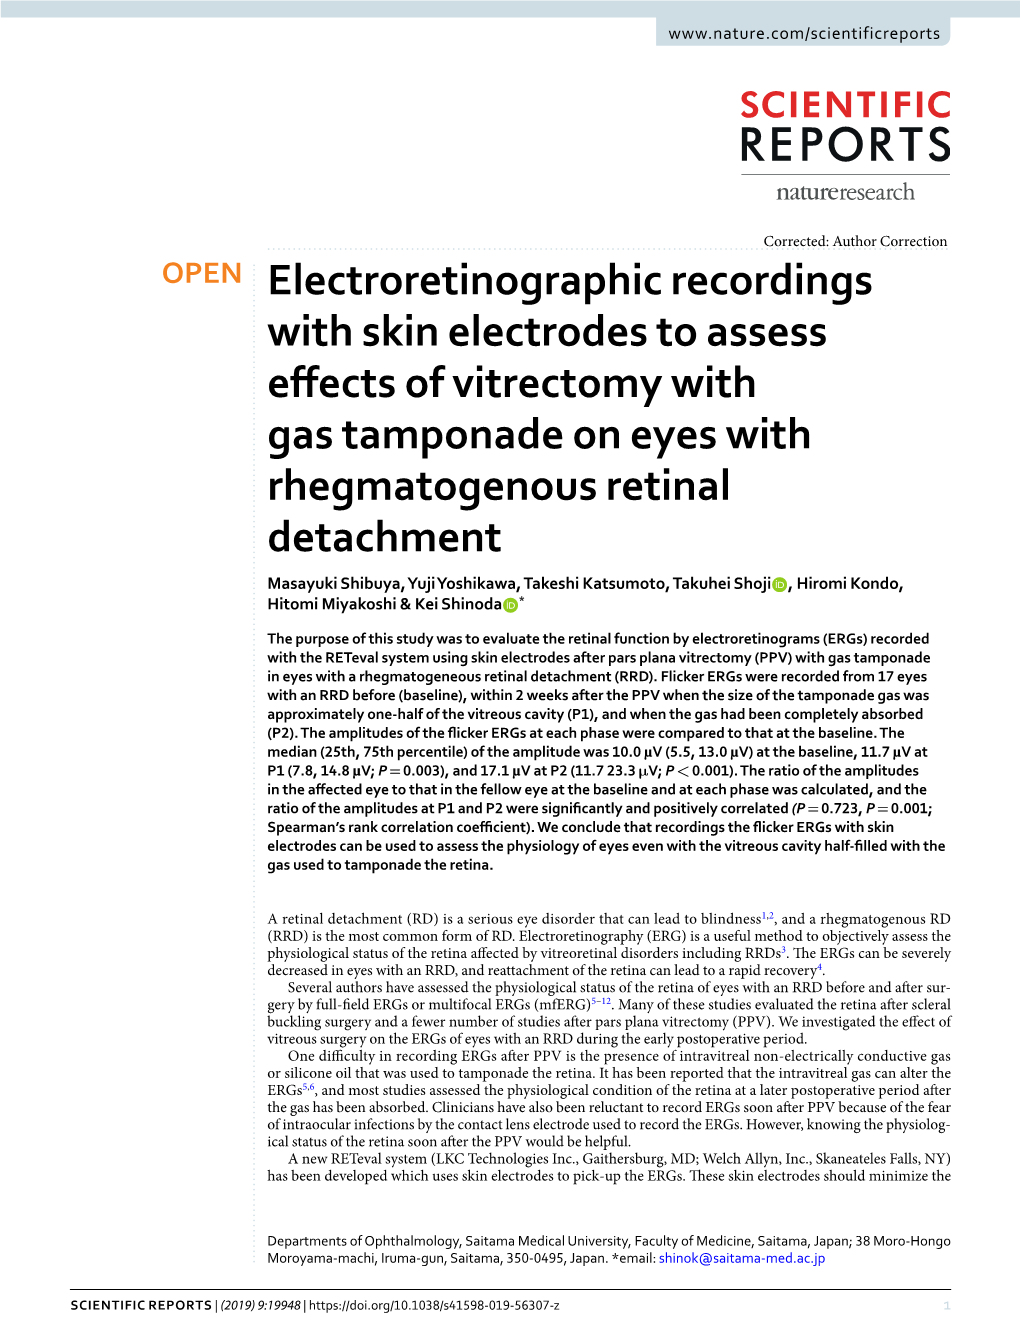 Electroretinographic Recordings with Skin Electrodes to Assess Effects of Vitrectomy with Gas Tamponade on Eyes with Rhegmatogen